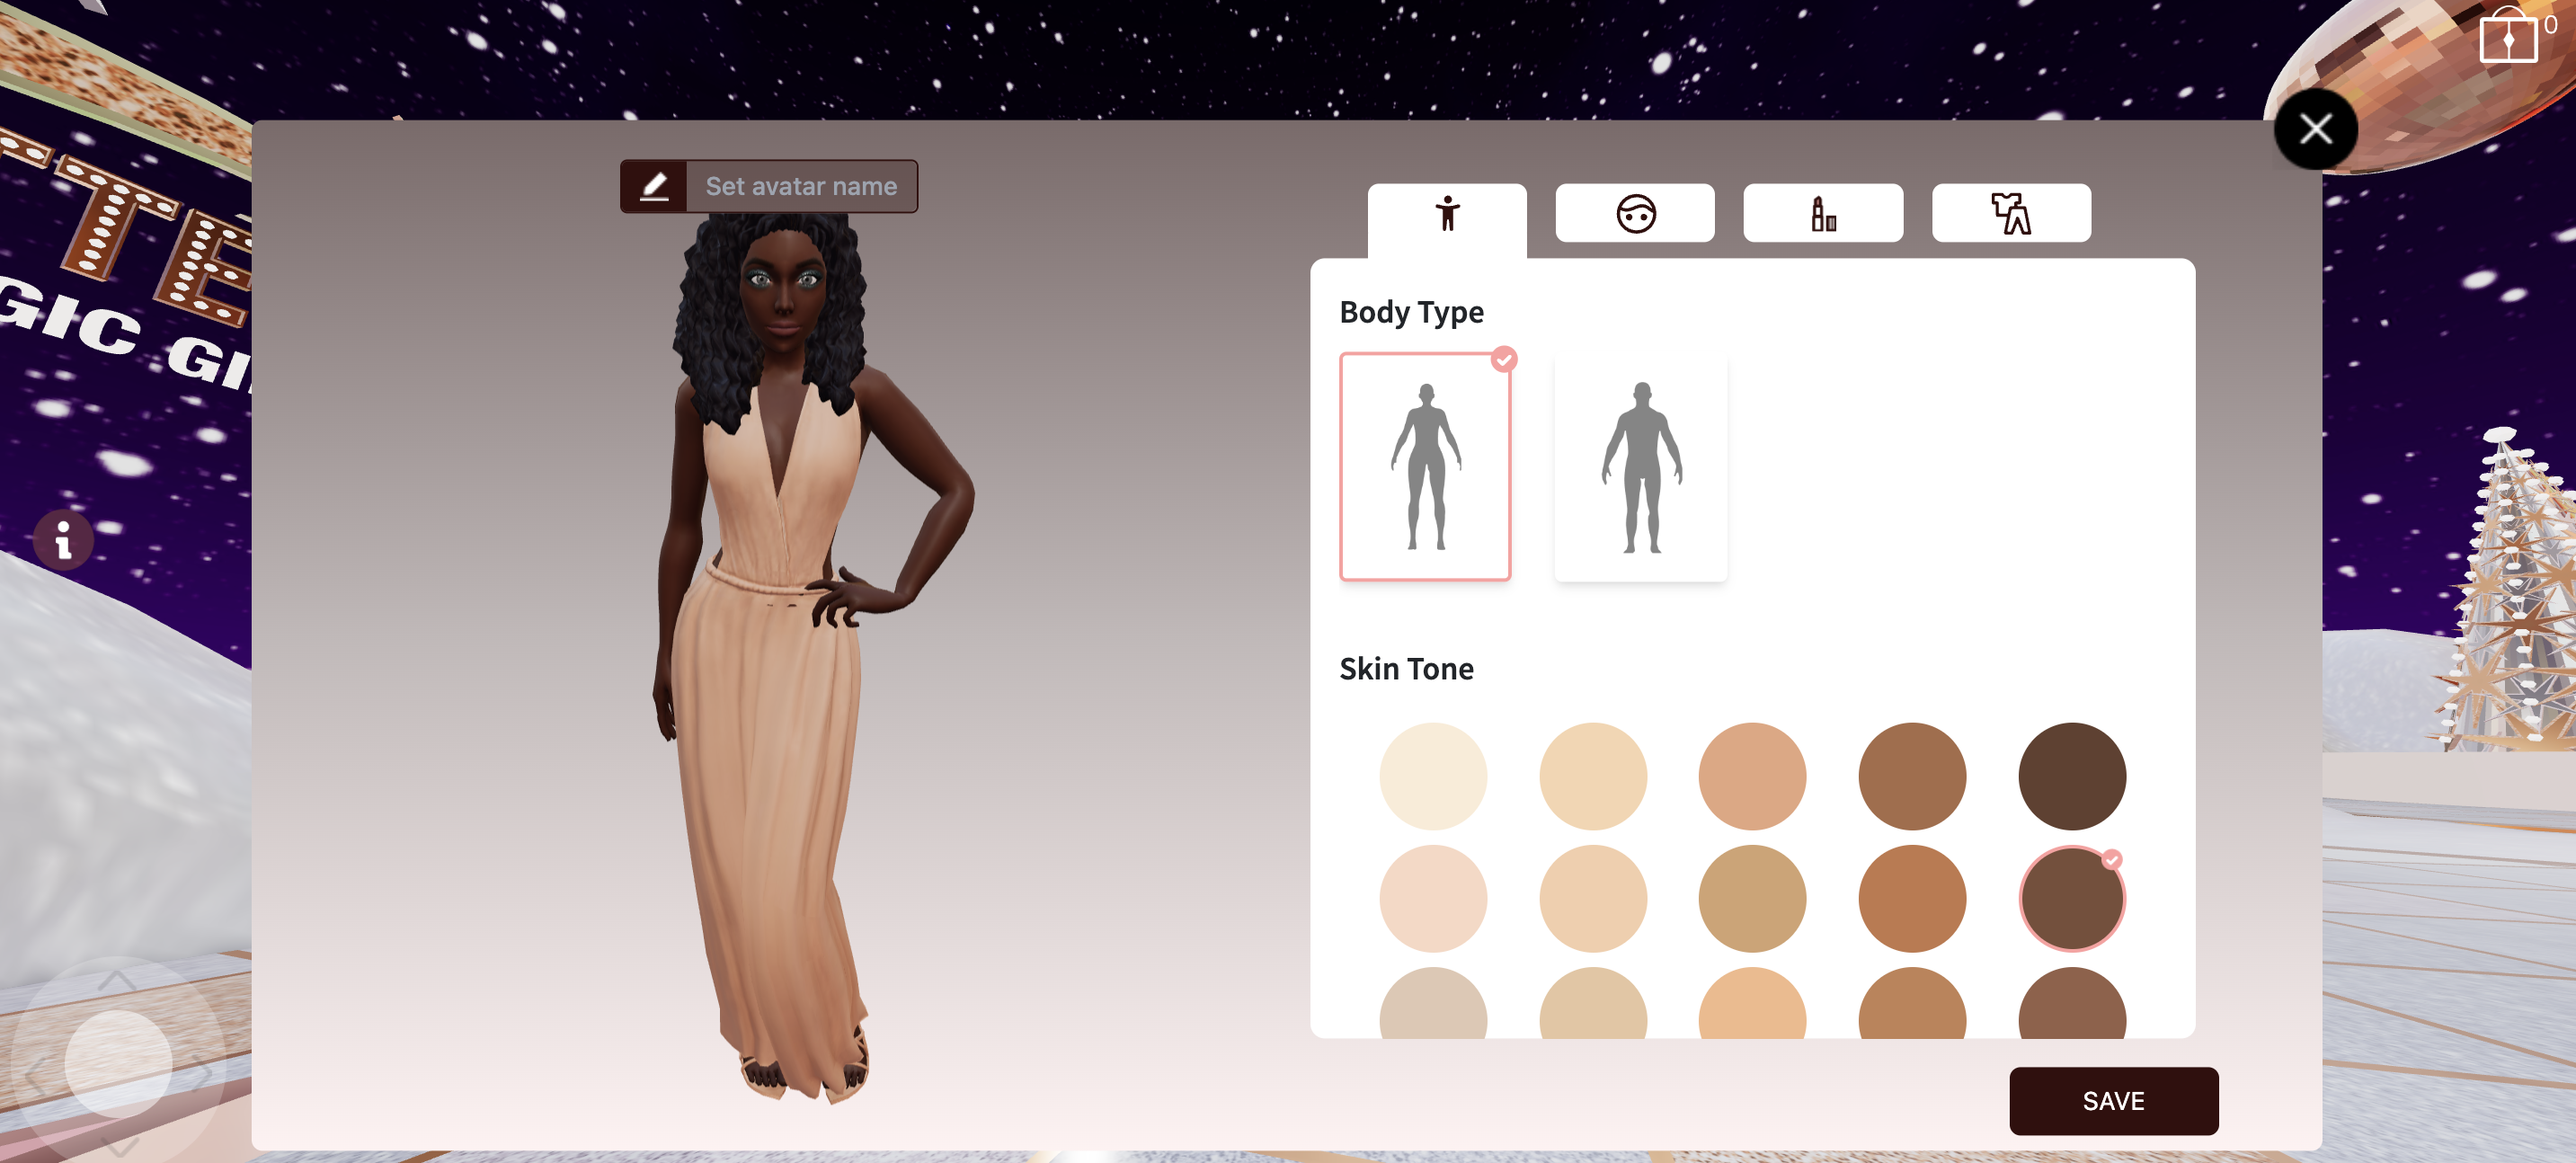 Each shopper can personalize the skin tone of their branded avatar